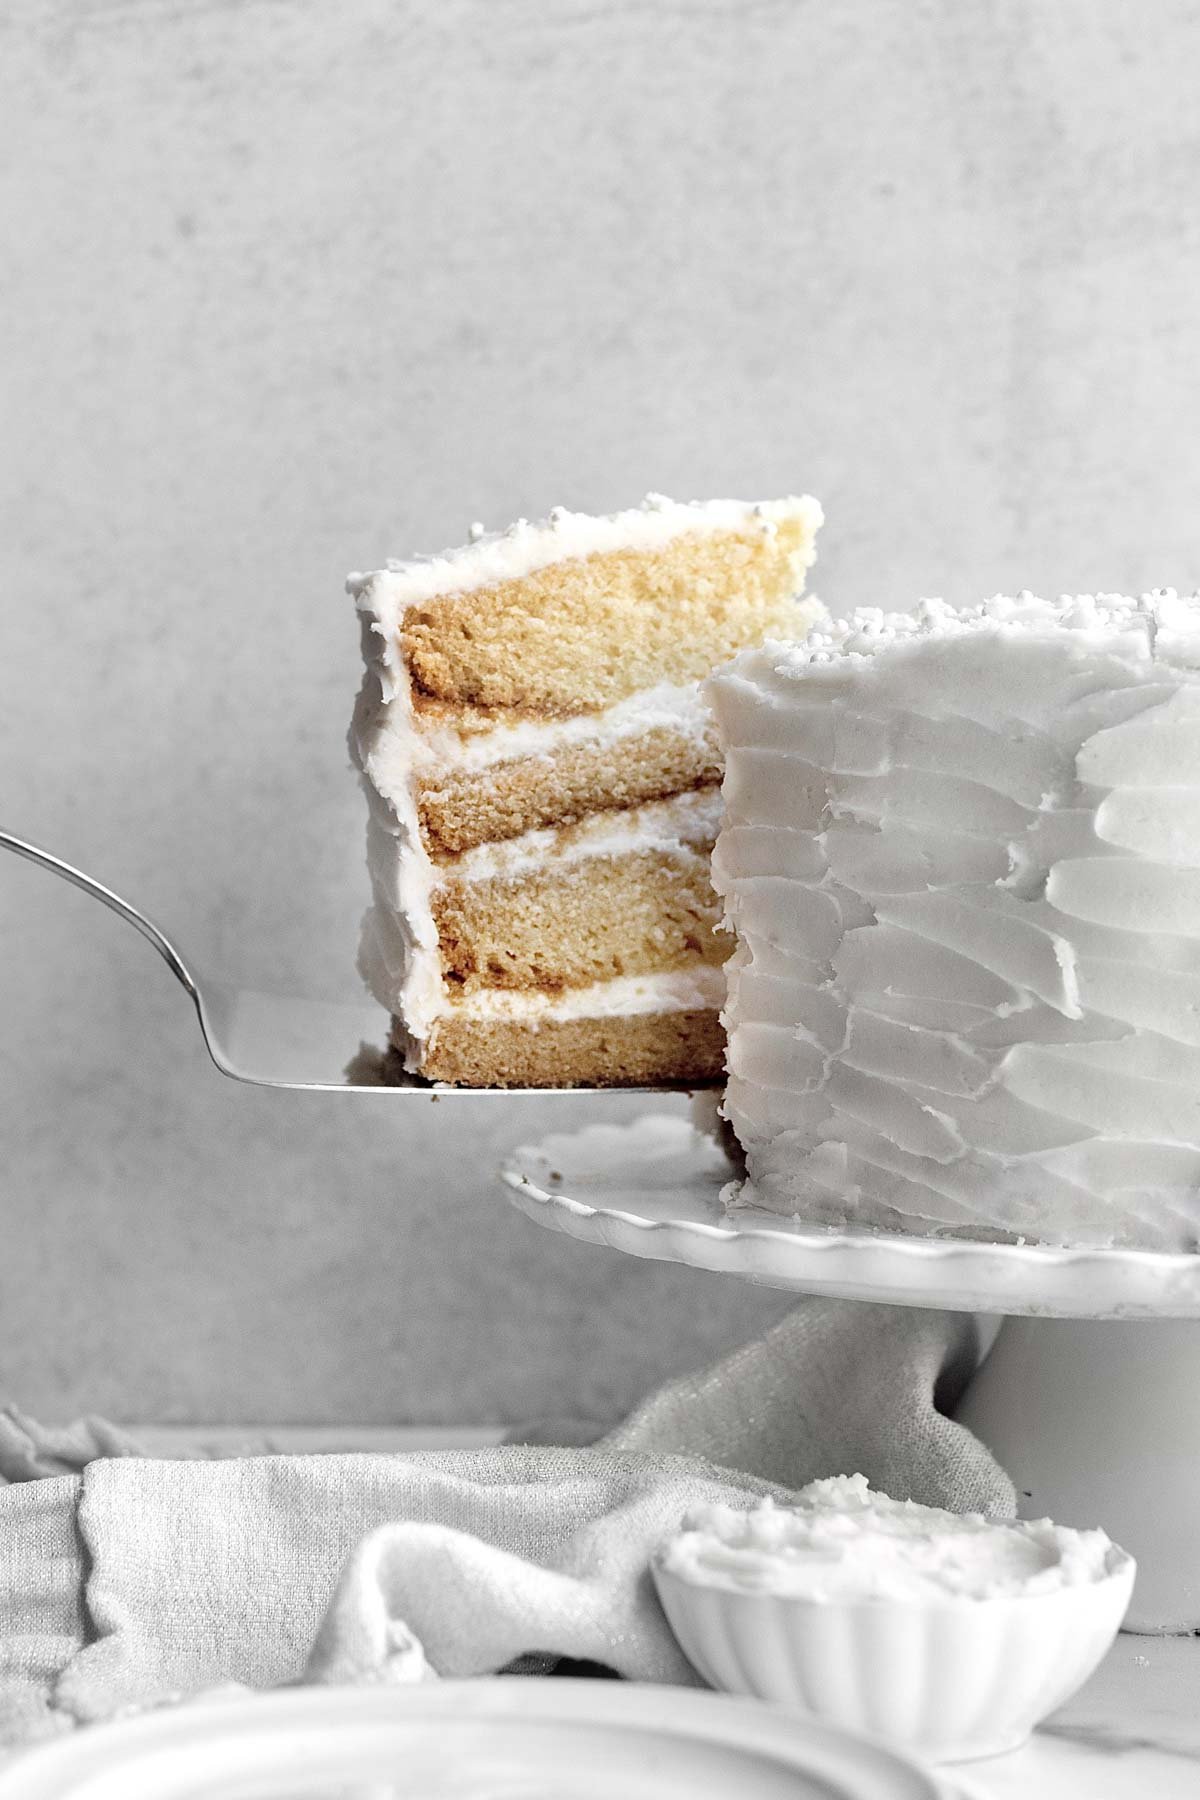 A vanilla frosted cake slice is taken from the whole.